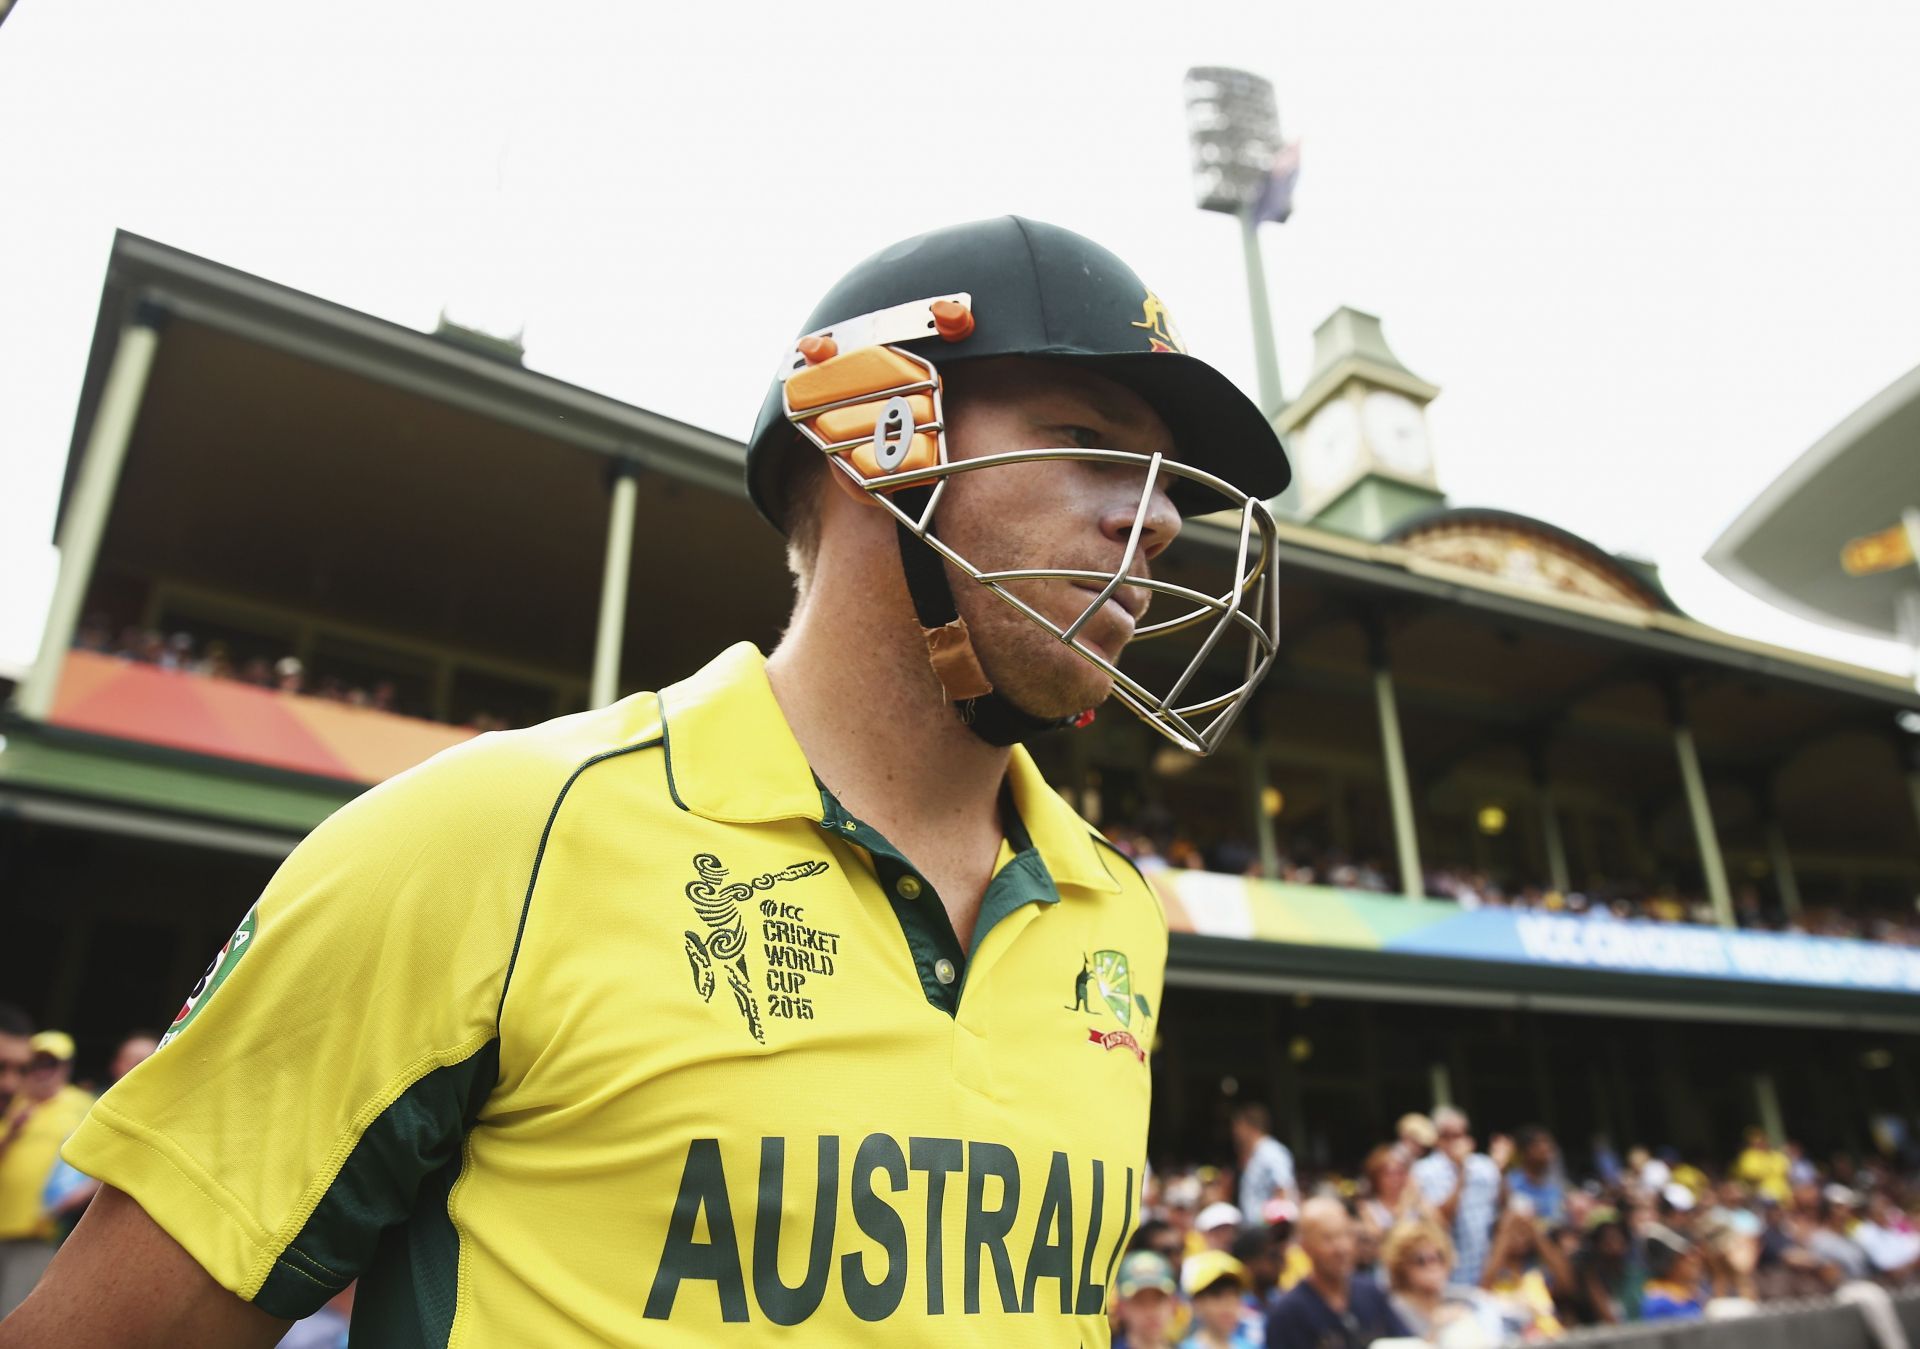 David Warner has confirmed his release from Sunrisers Hyderabad ahead of IPL Auction 2022